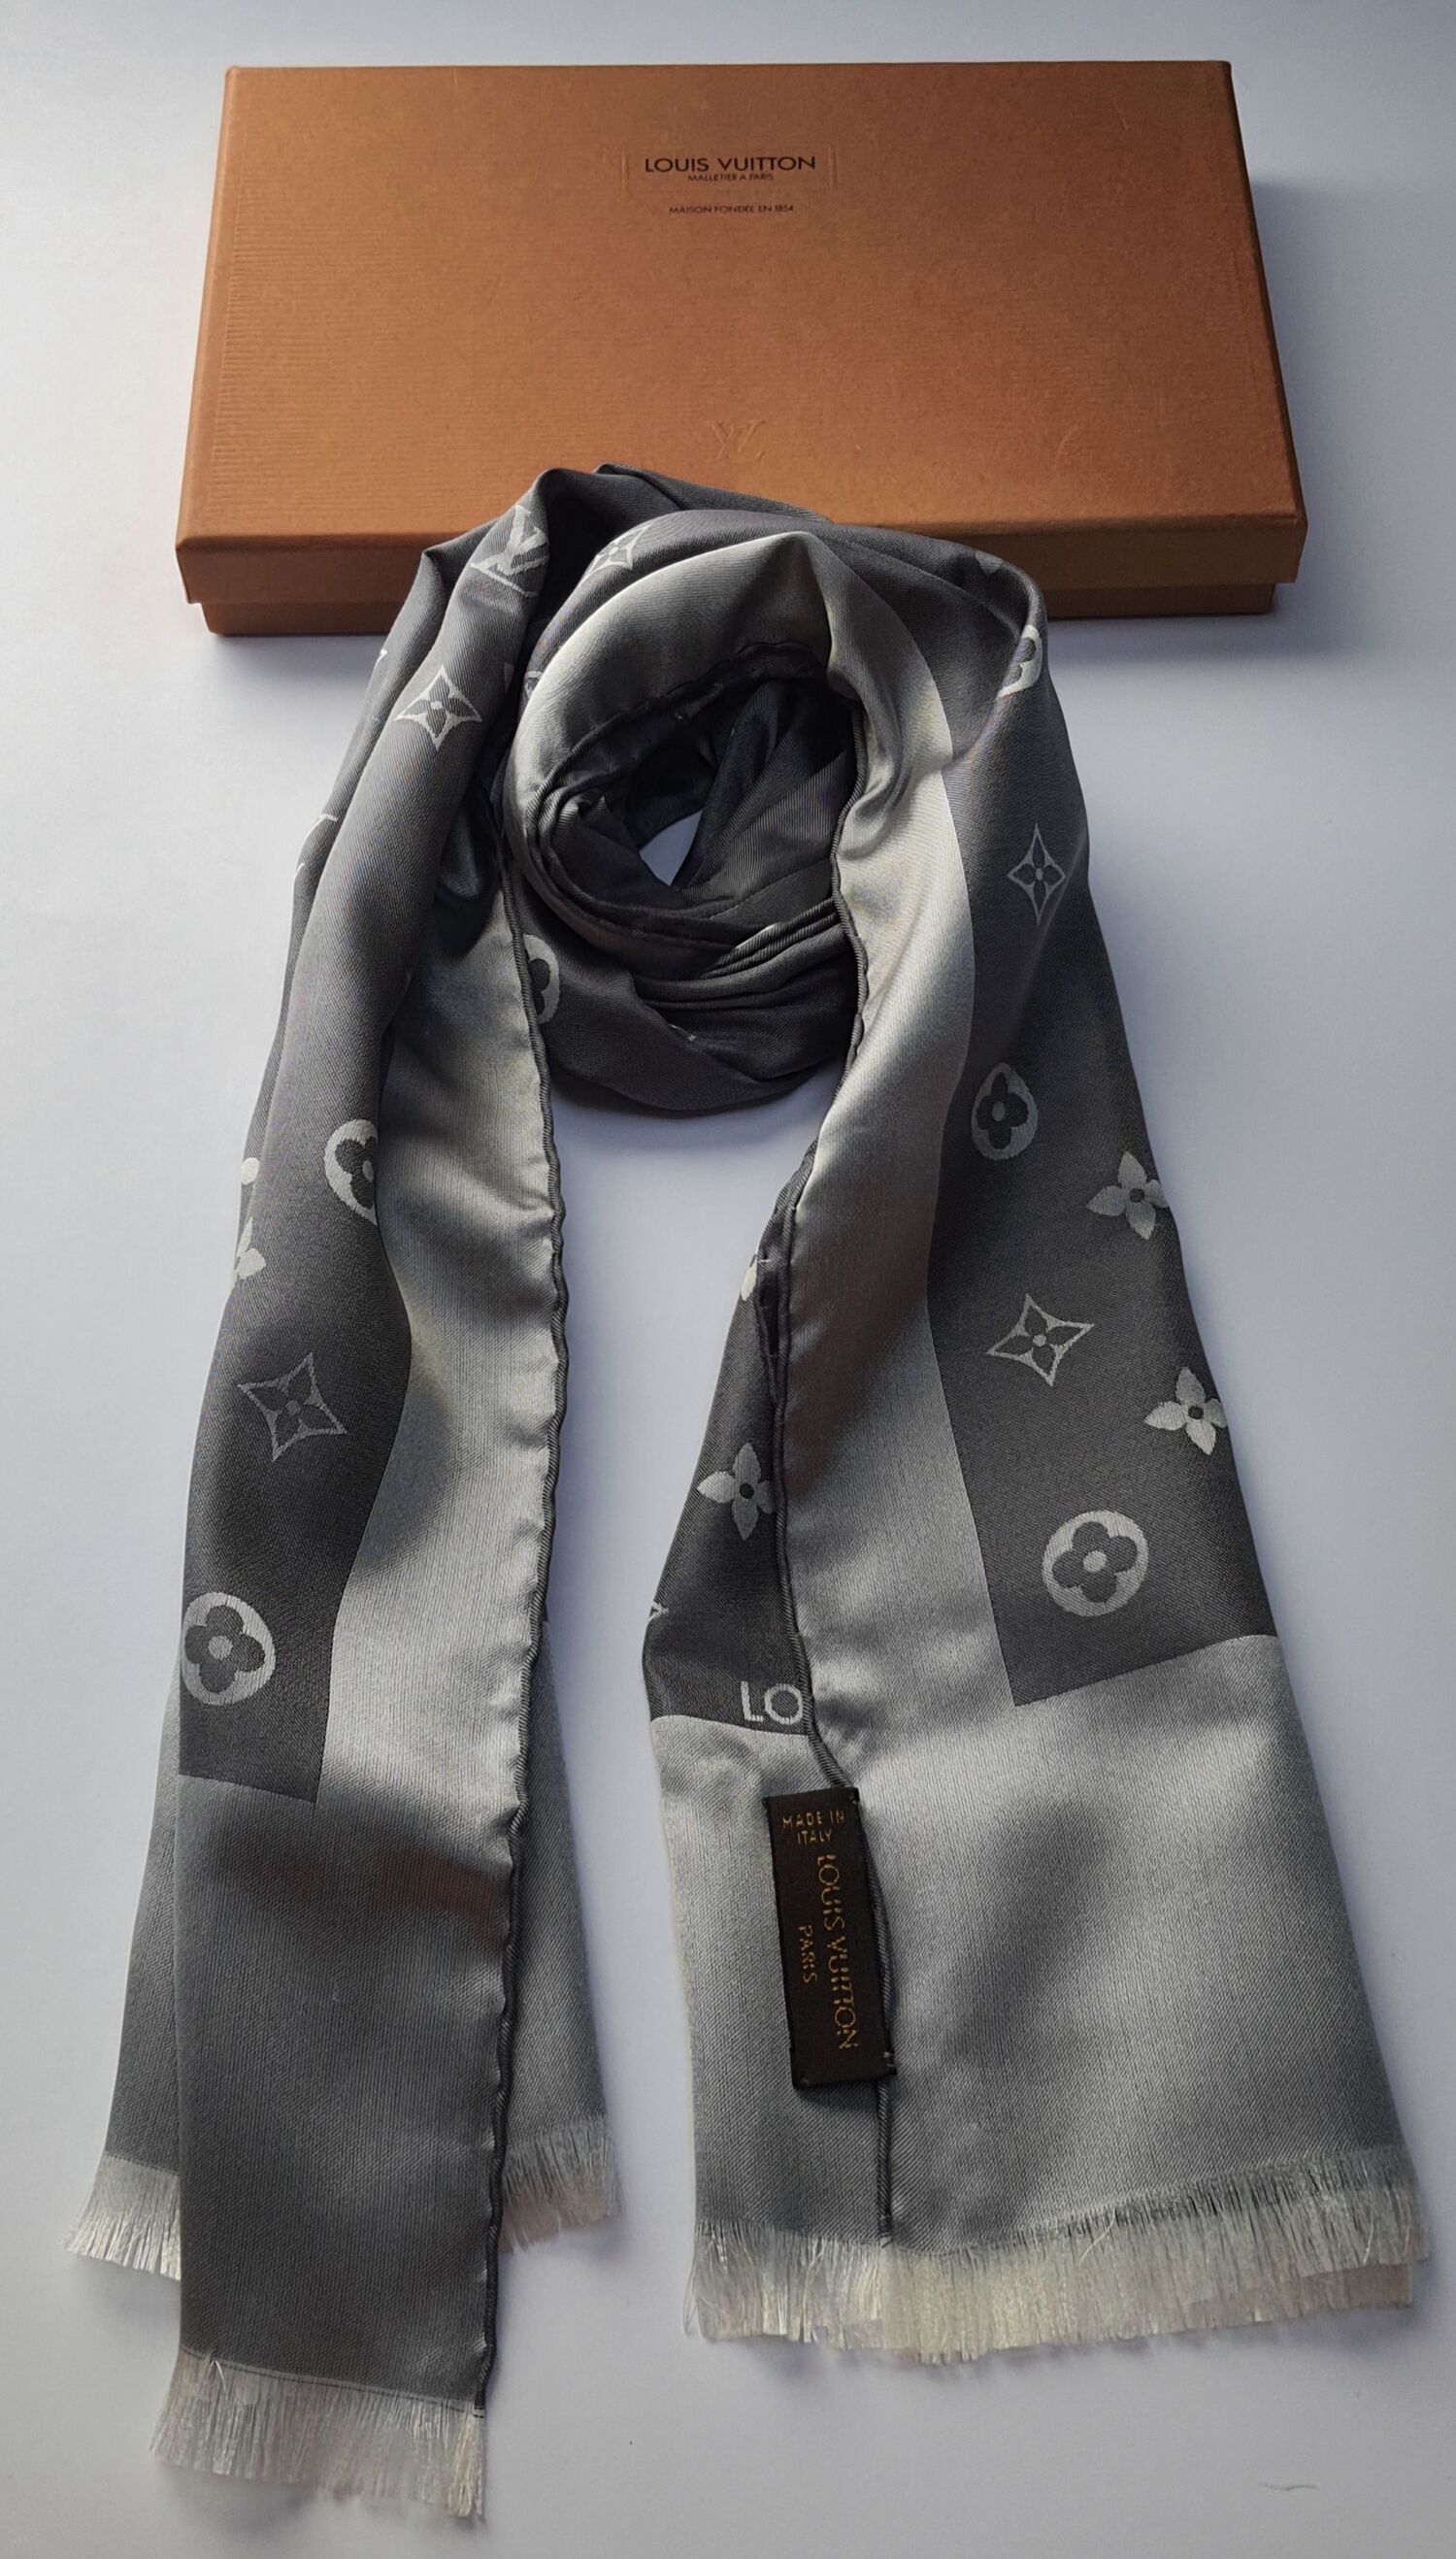 How to Wear Louis Vuitton Scarves - Search for Louis Vuitton Scarves